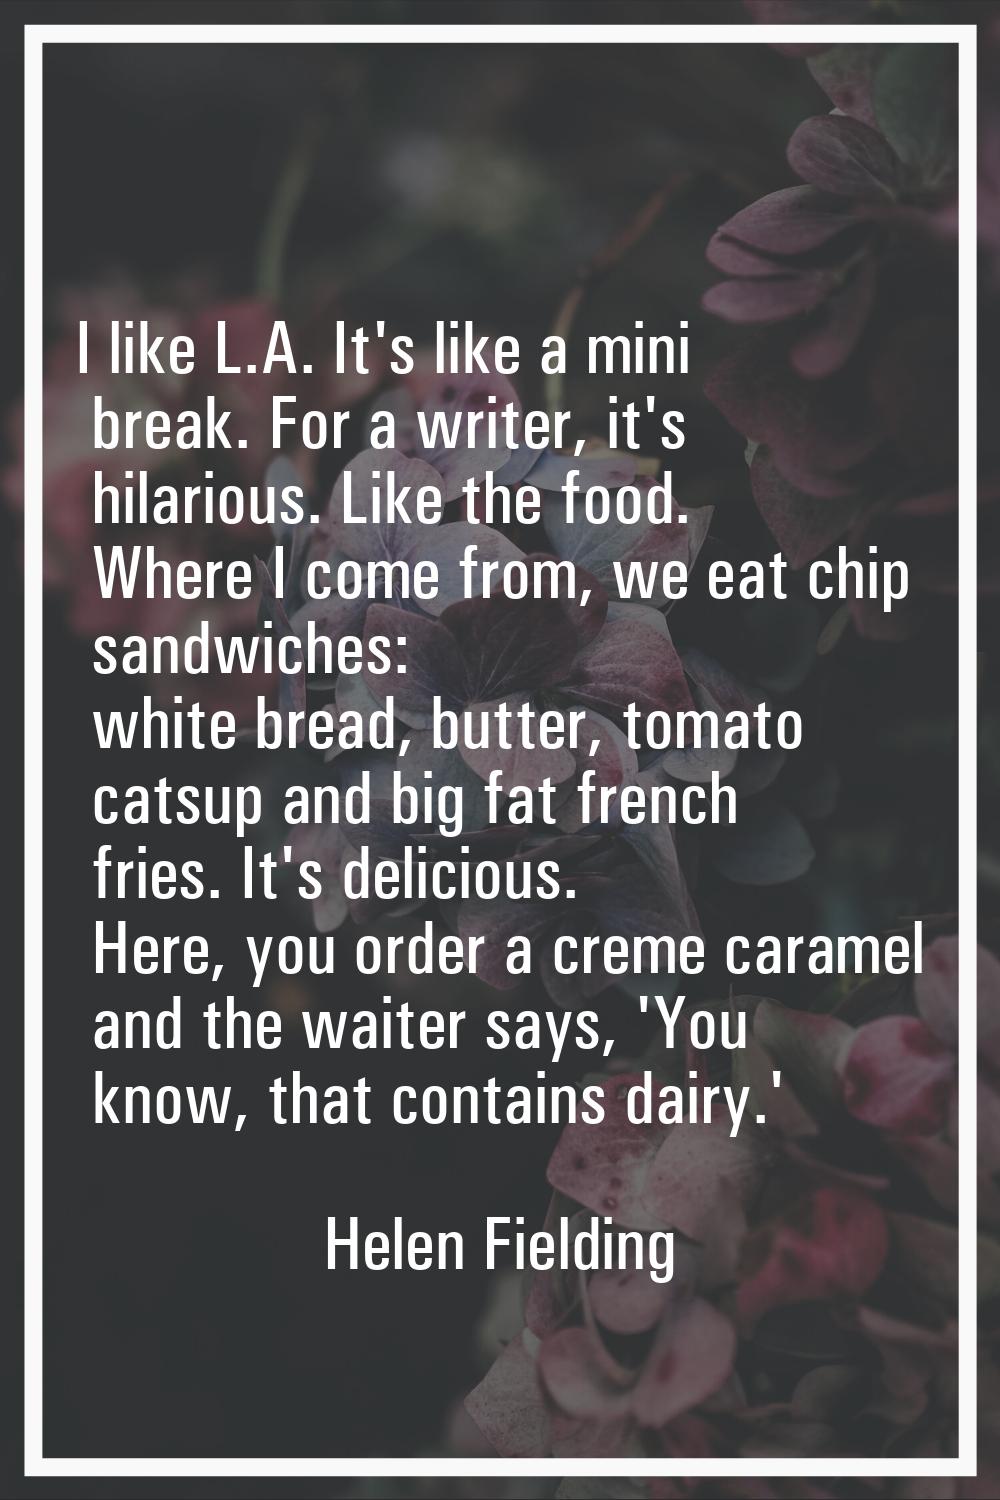 I like L.A. It's like a mini break. For a writer, it's hilarious. Like the food. Where I come from,